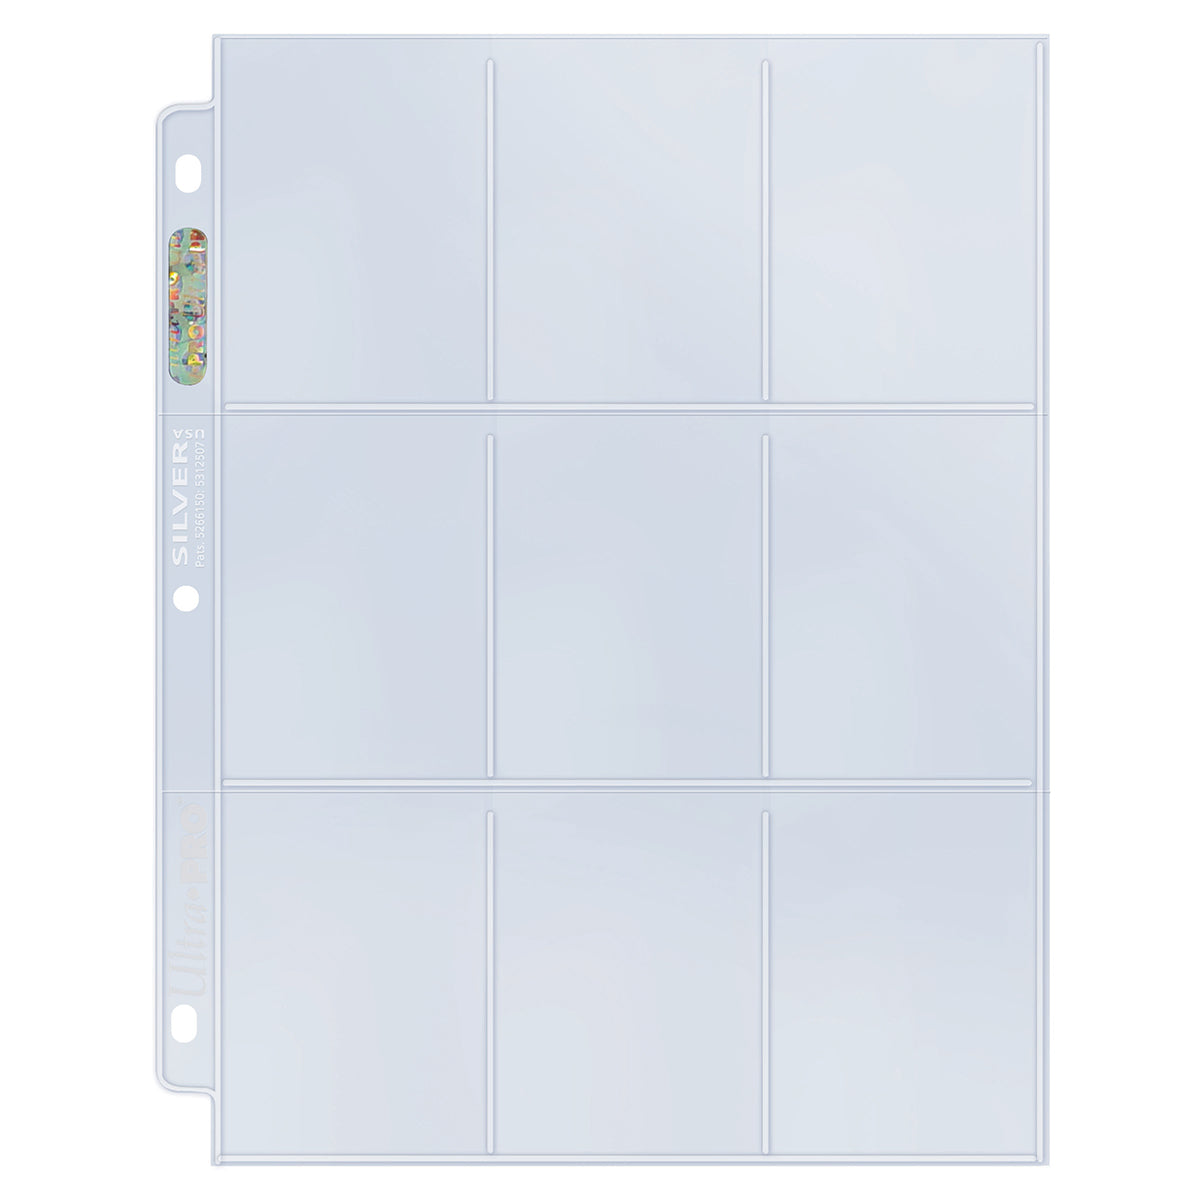 Ultra Pro 9 Pocket Pages Silver Series